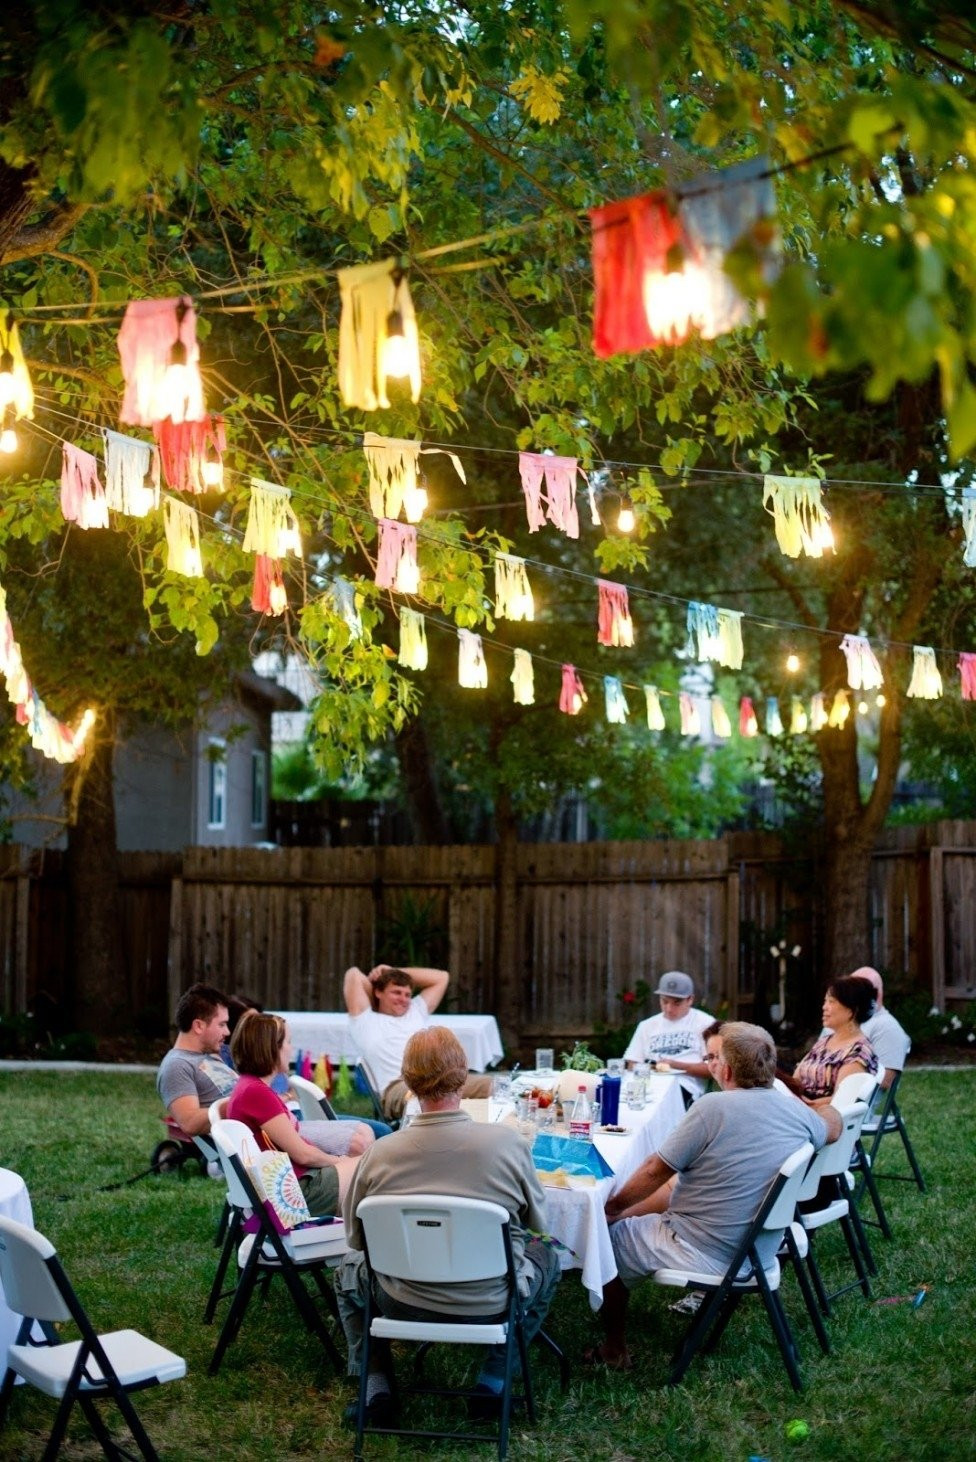 Backyard Party Design Ideas
 10 Famous Outdoor Birthday Party Ideas For Adults 2019